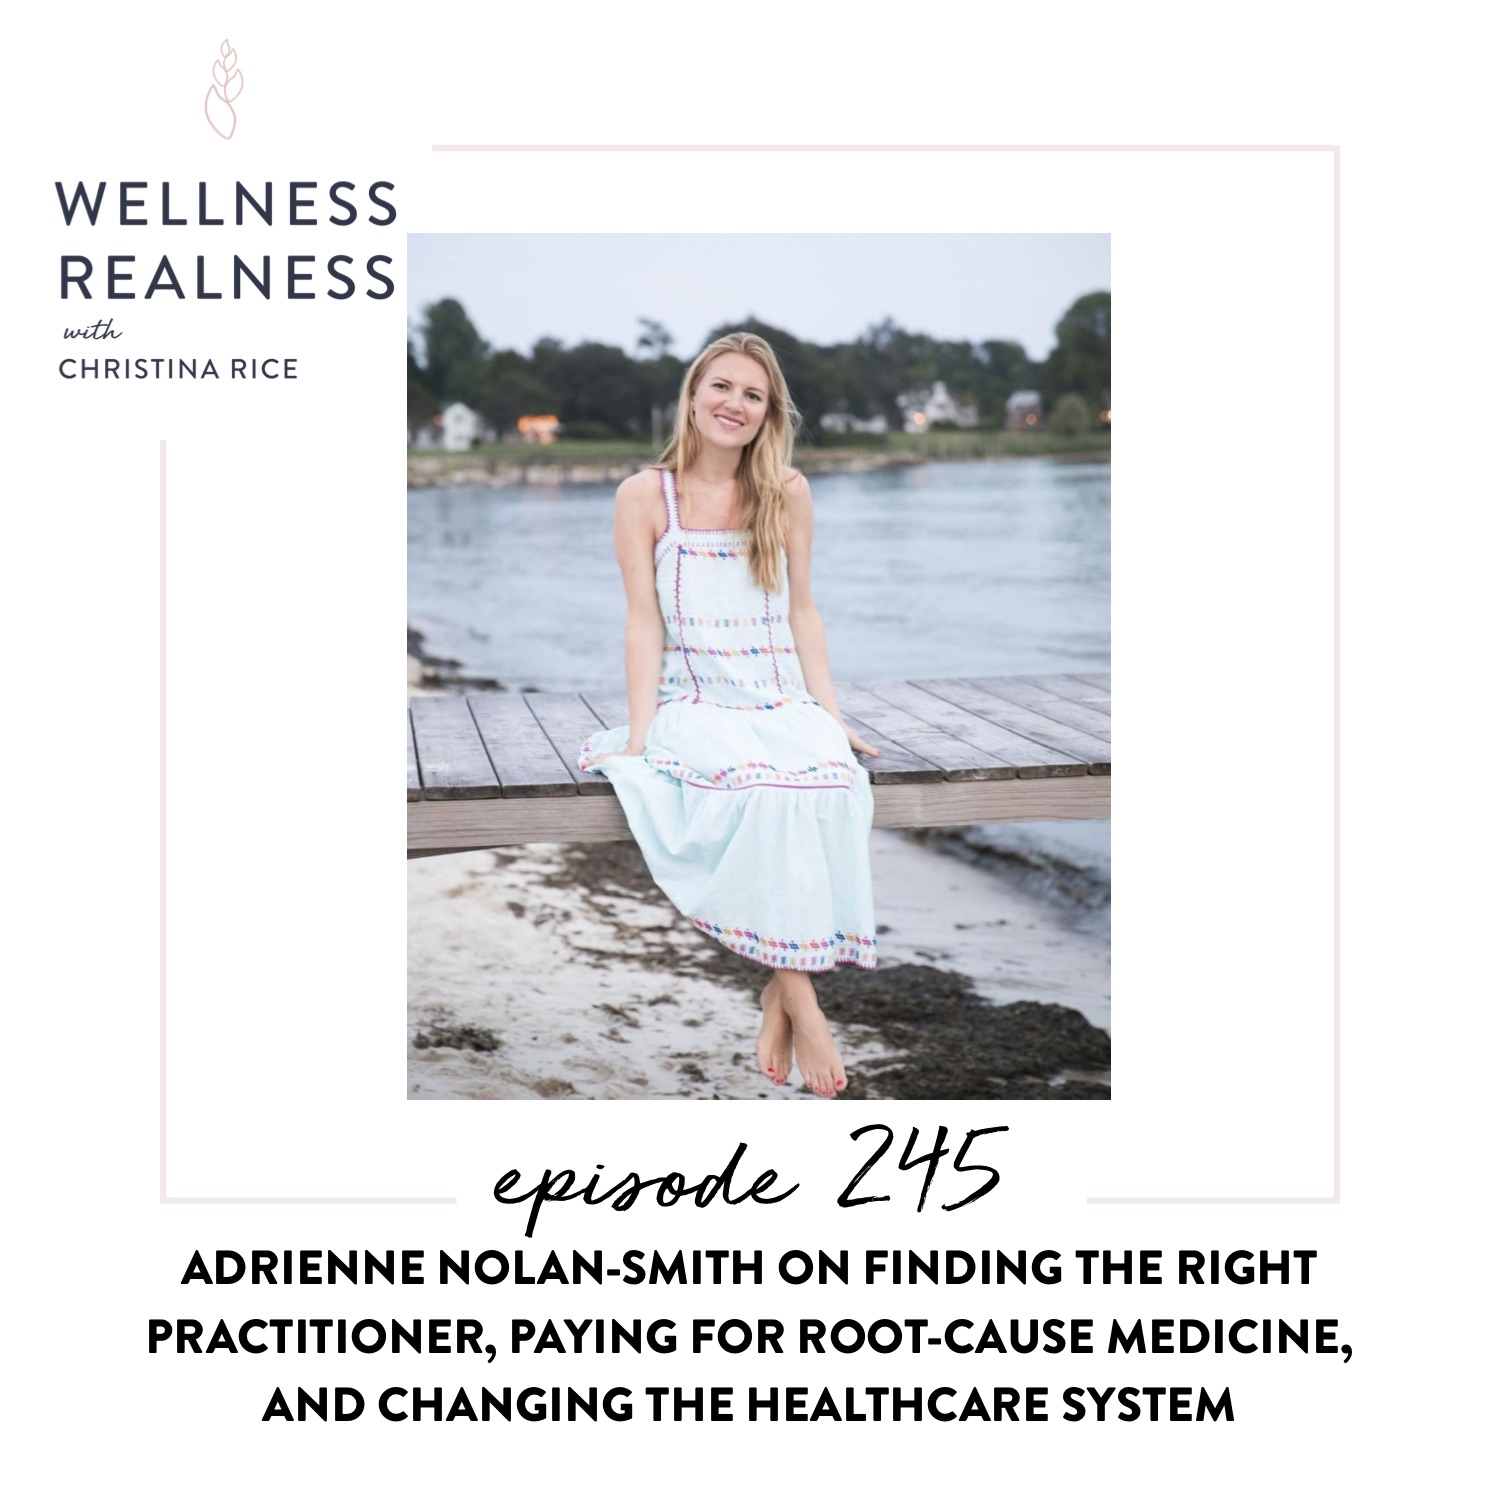 245: Adrienne Nolan-Smith on Finding the Right Practitioner, Paying for Root-Cause Medicine, and Changing the Healthcare System